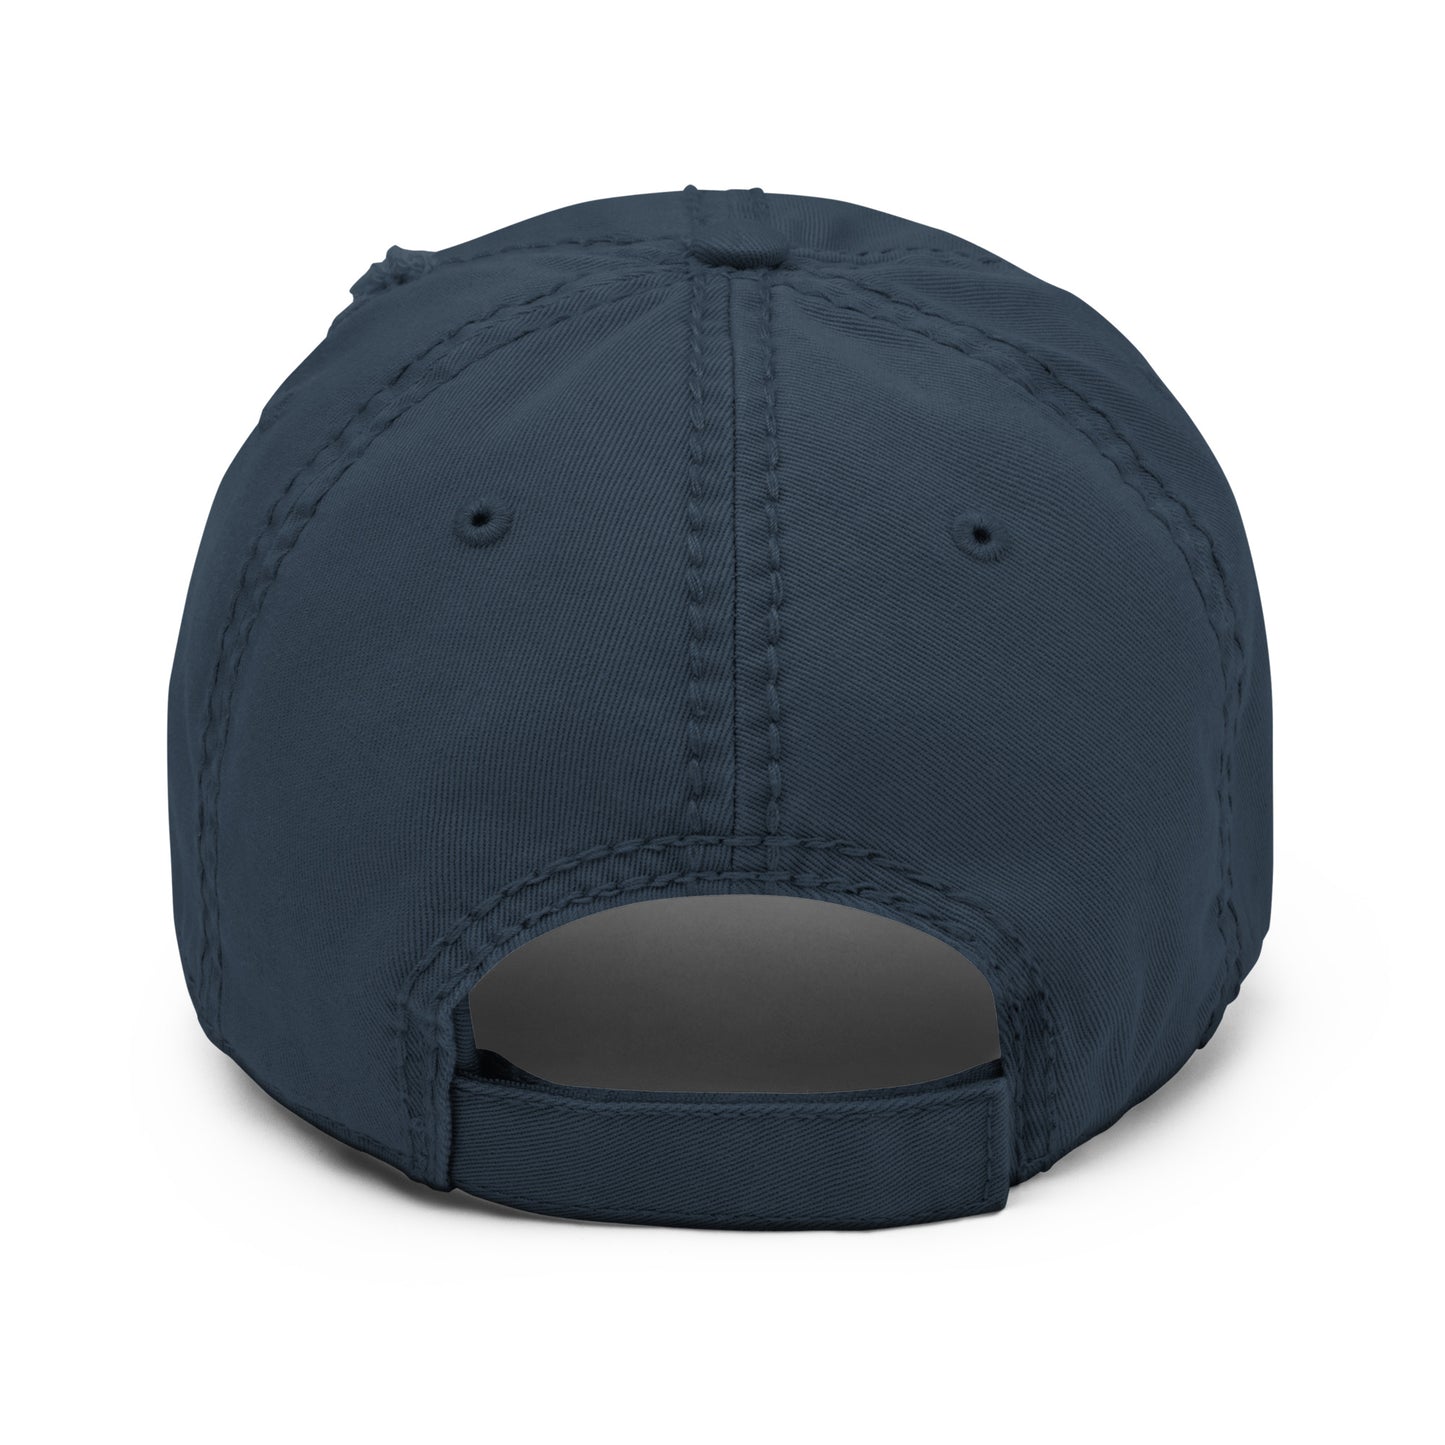 ANGLICO Naval Flight Officer Distressed Hat